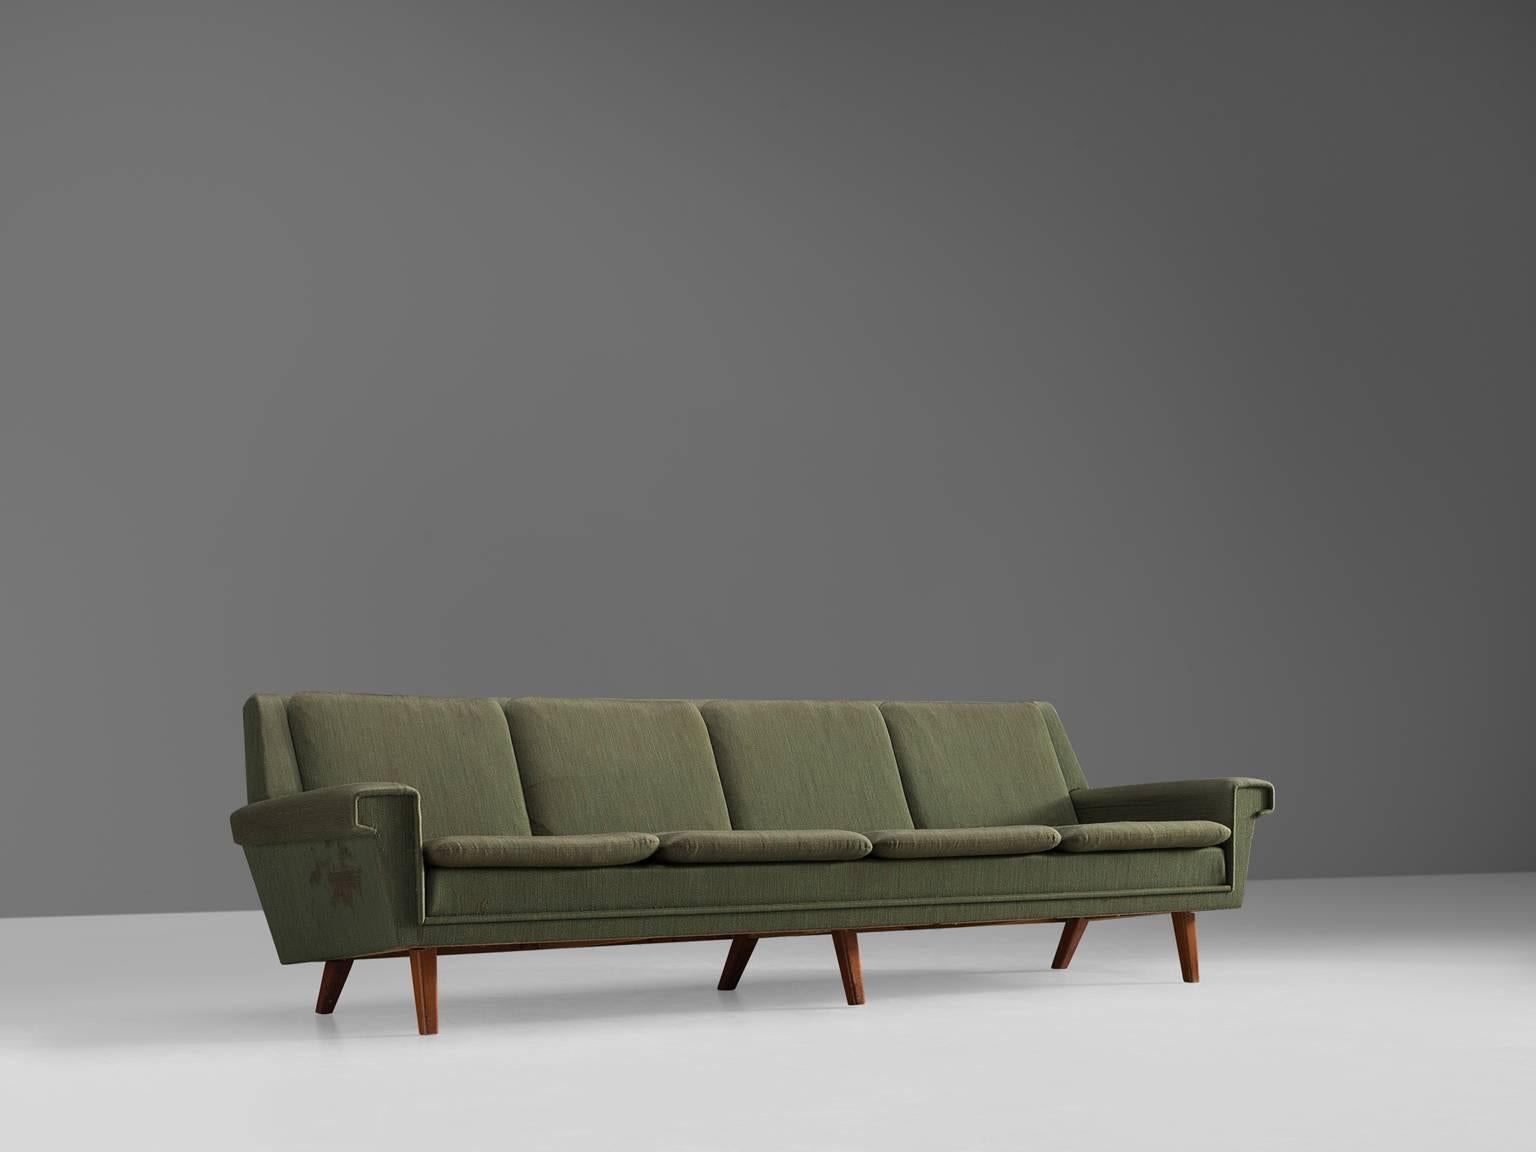 Four-seat sofa, green, wood, Denmark, 1950s

This sofa holds the middle between theatrical details that are used on a minimalistic base. The tapered wooden legs are accompanied by a neutral green colored thick fabric that functions as a modest